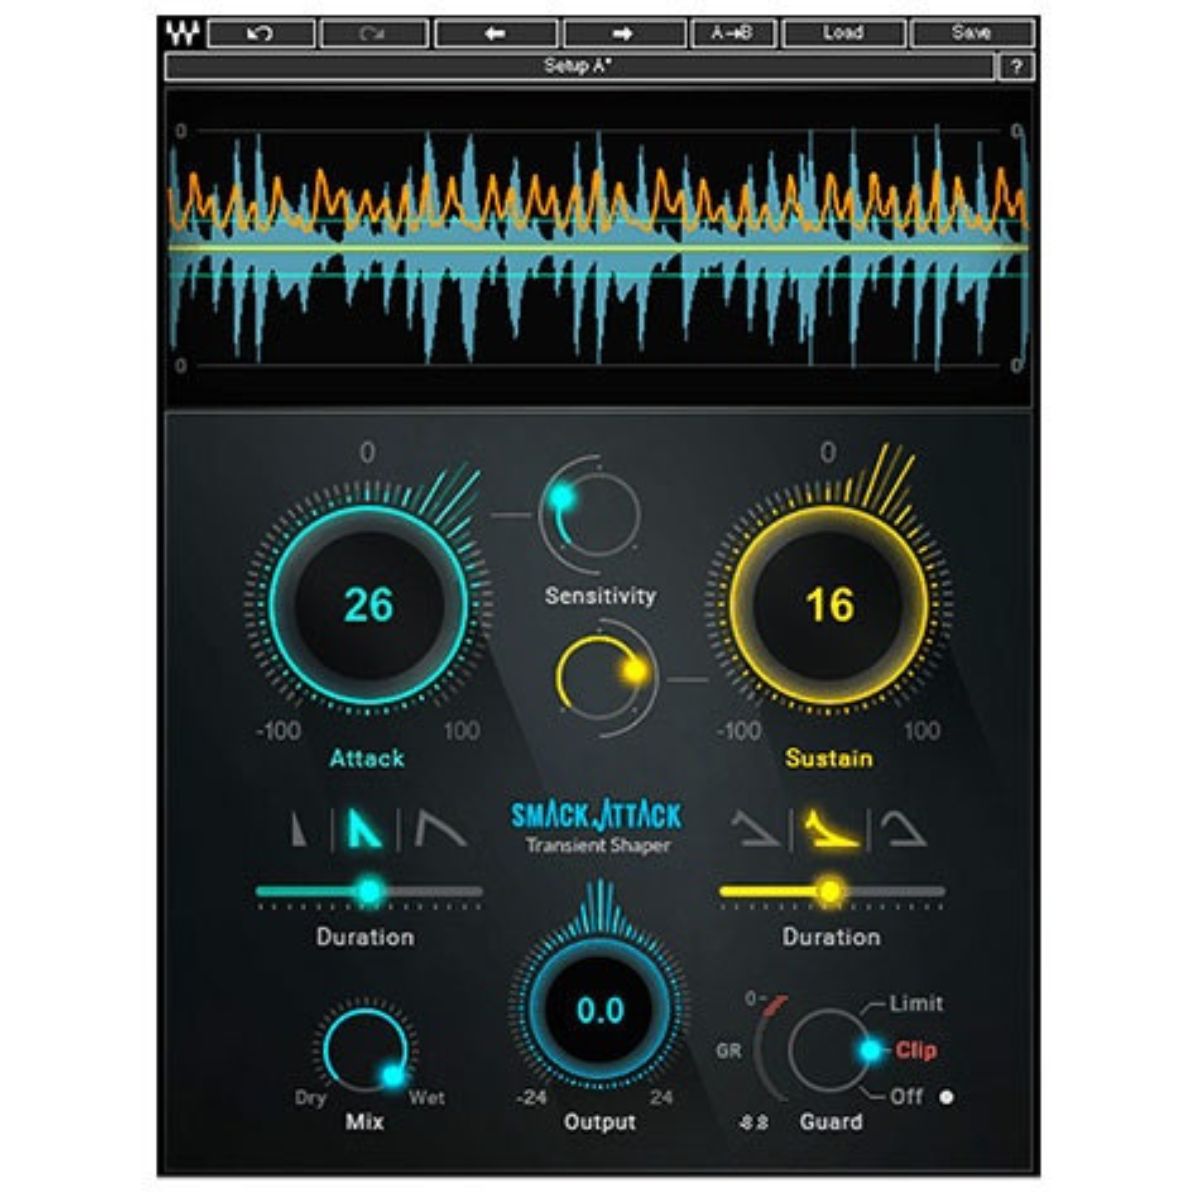 Waves Smack Attack Transient Shaping Plug-in